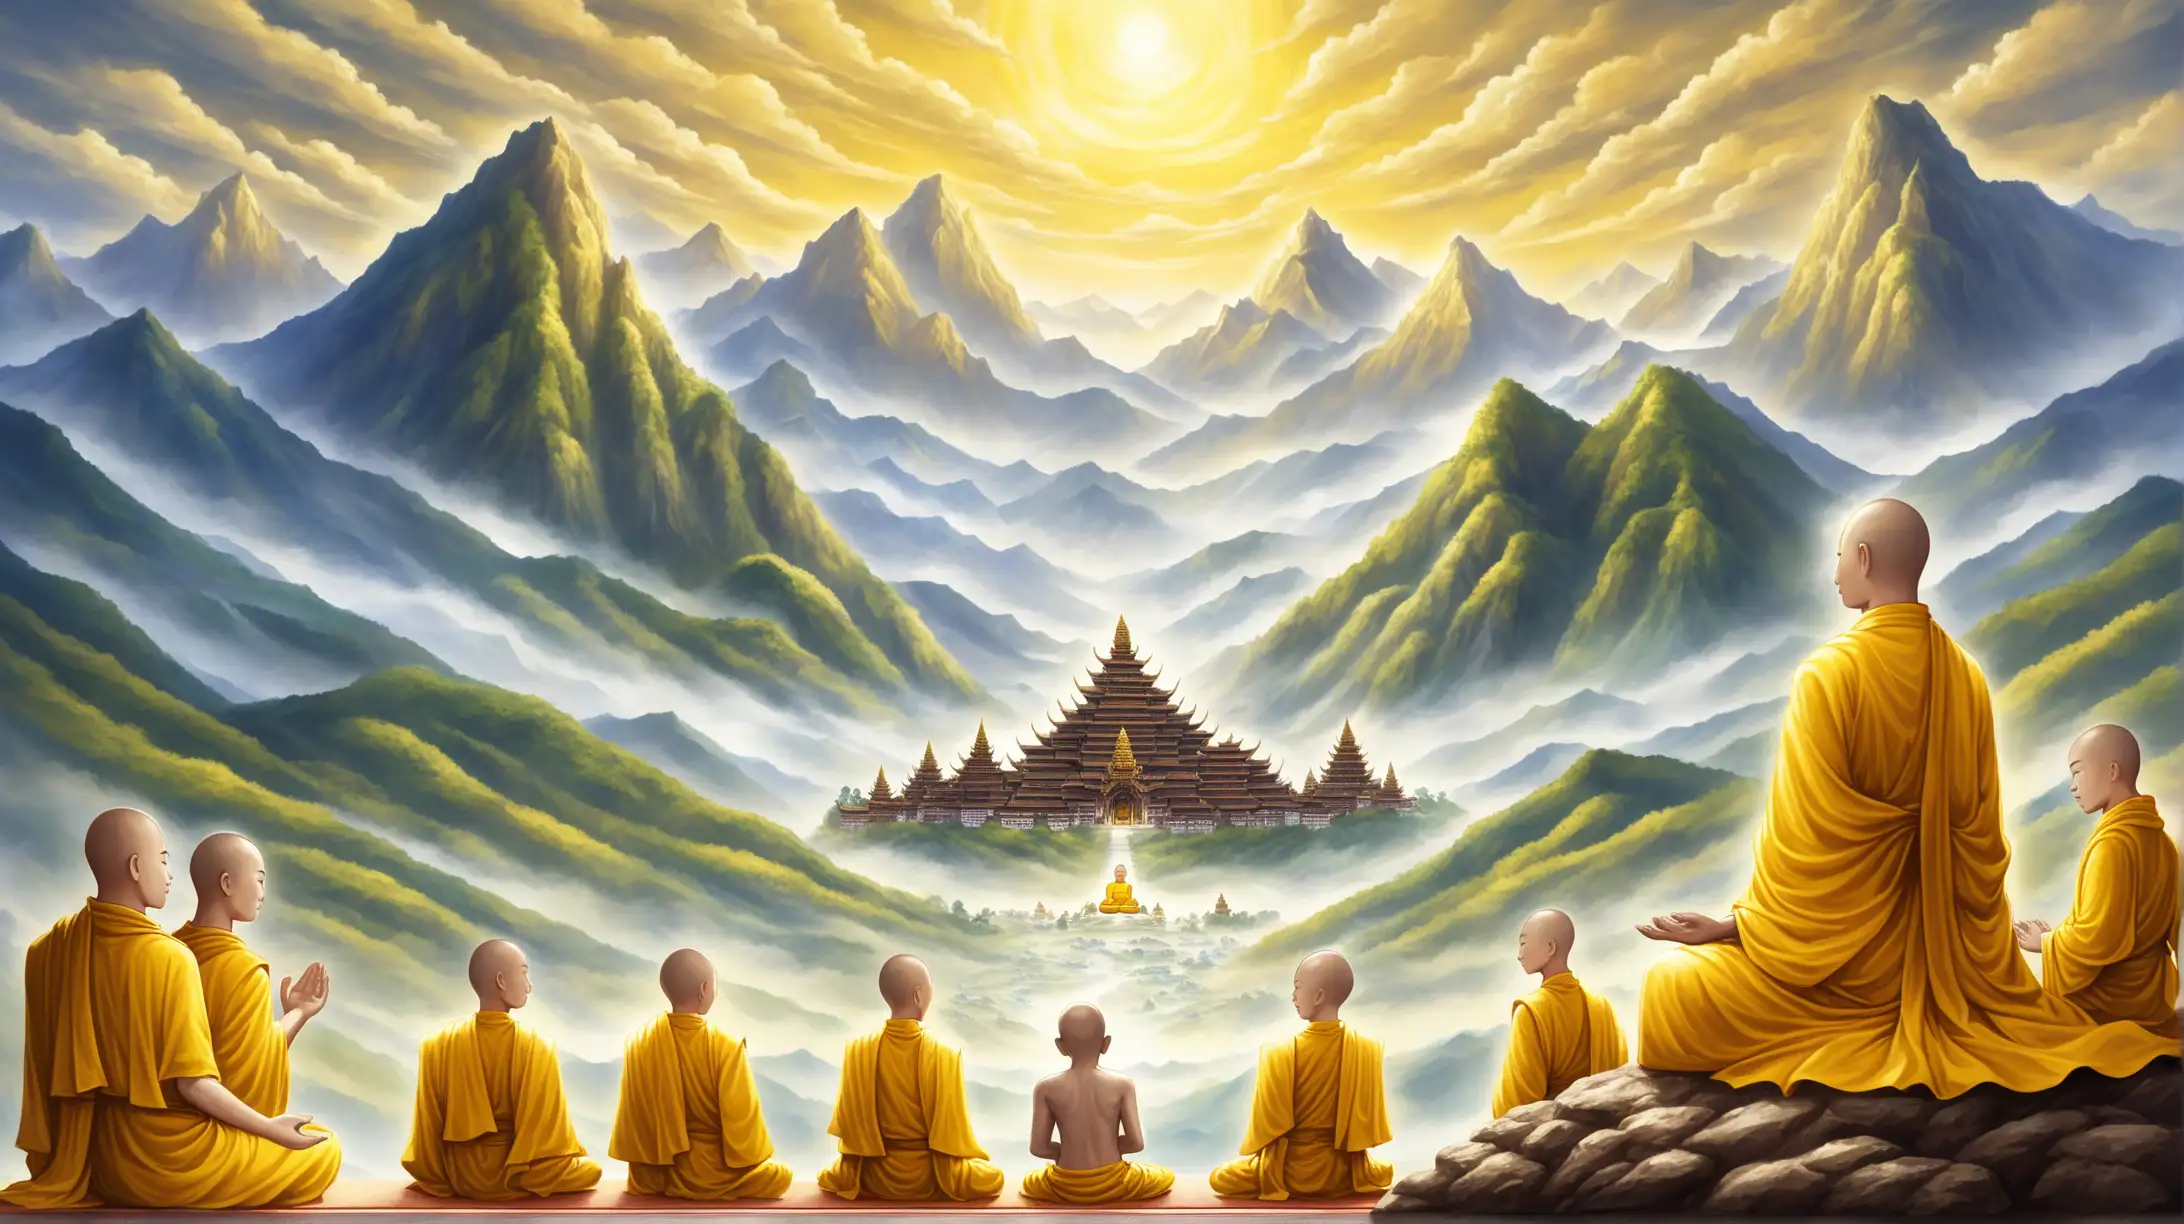 The Buddha is teaching monks, The Buddha is dressed in white, he is radiant, the monks are wearing yellow robes, there is a dramatic sky, set in a mountain region with majestic distant peaks.